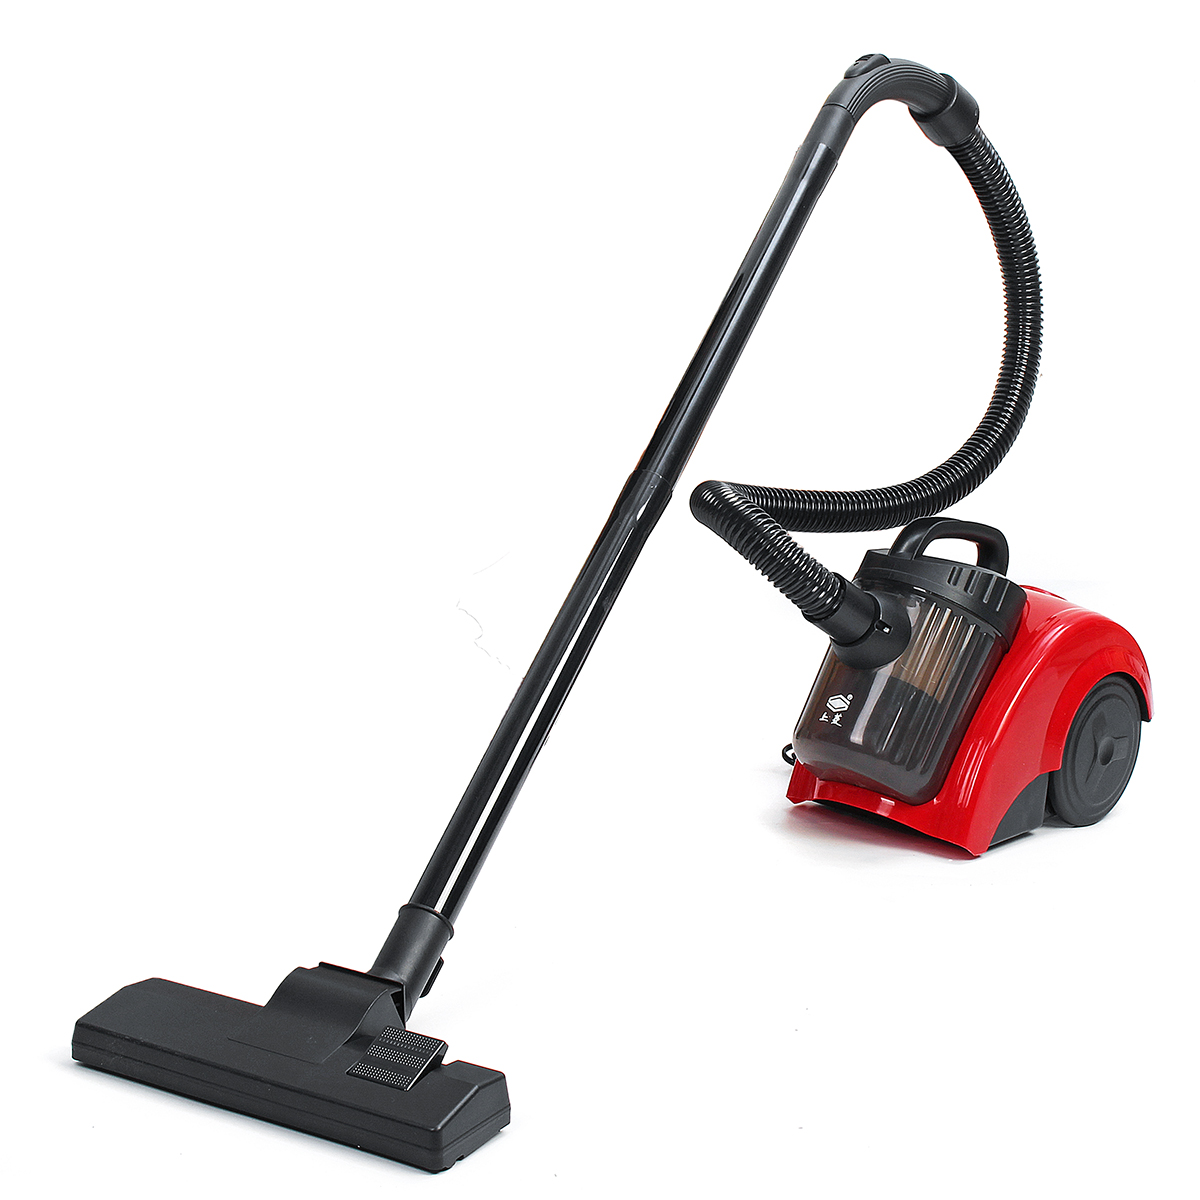 

220V 1000W Handheld Vacuum Cleaner Red Portable Filter Carpet Dust Collector Carpet Sweep Home